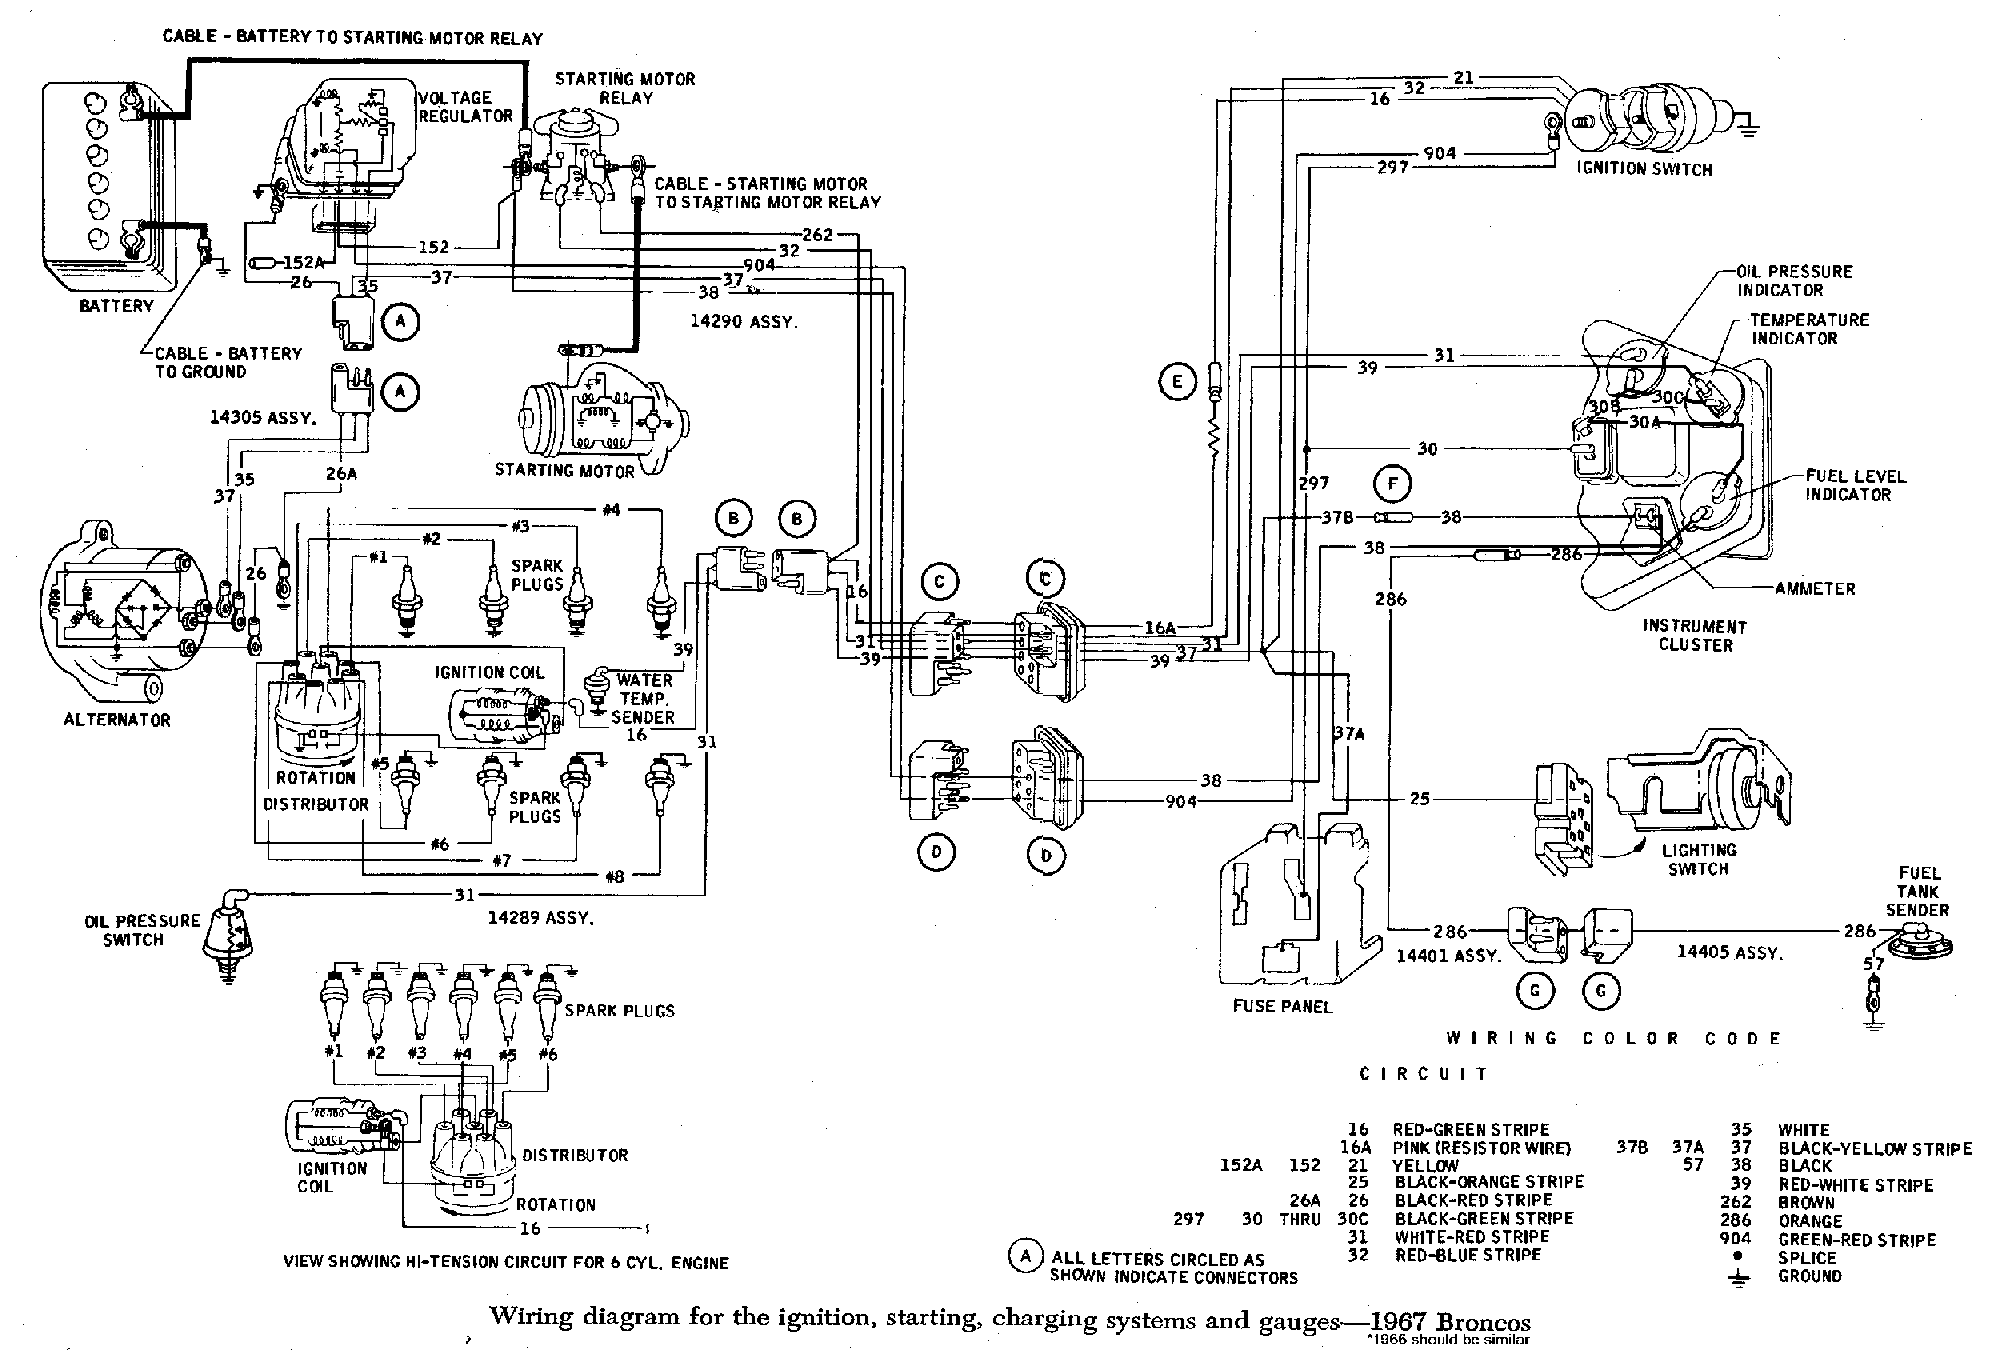 Fuel Injection Technical Library Early Bronco Wiring Diagrams